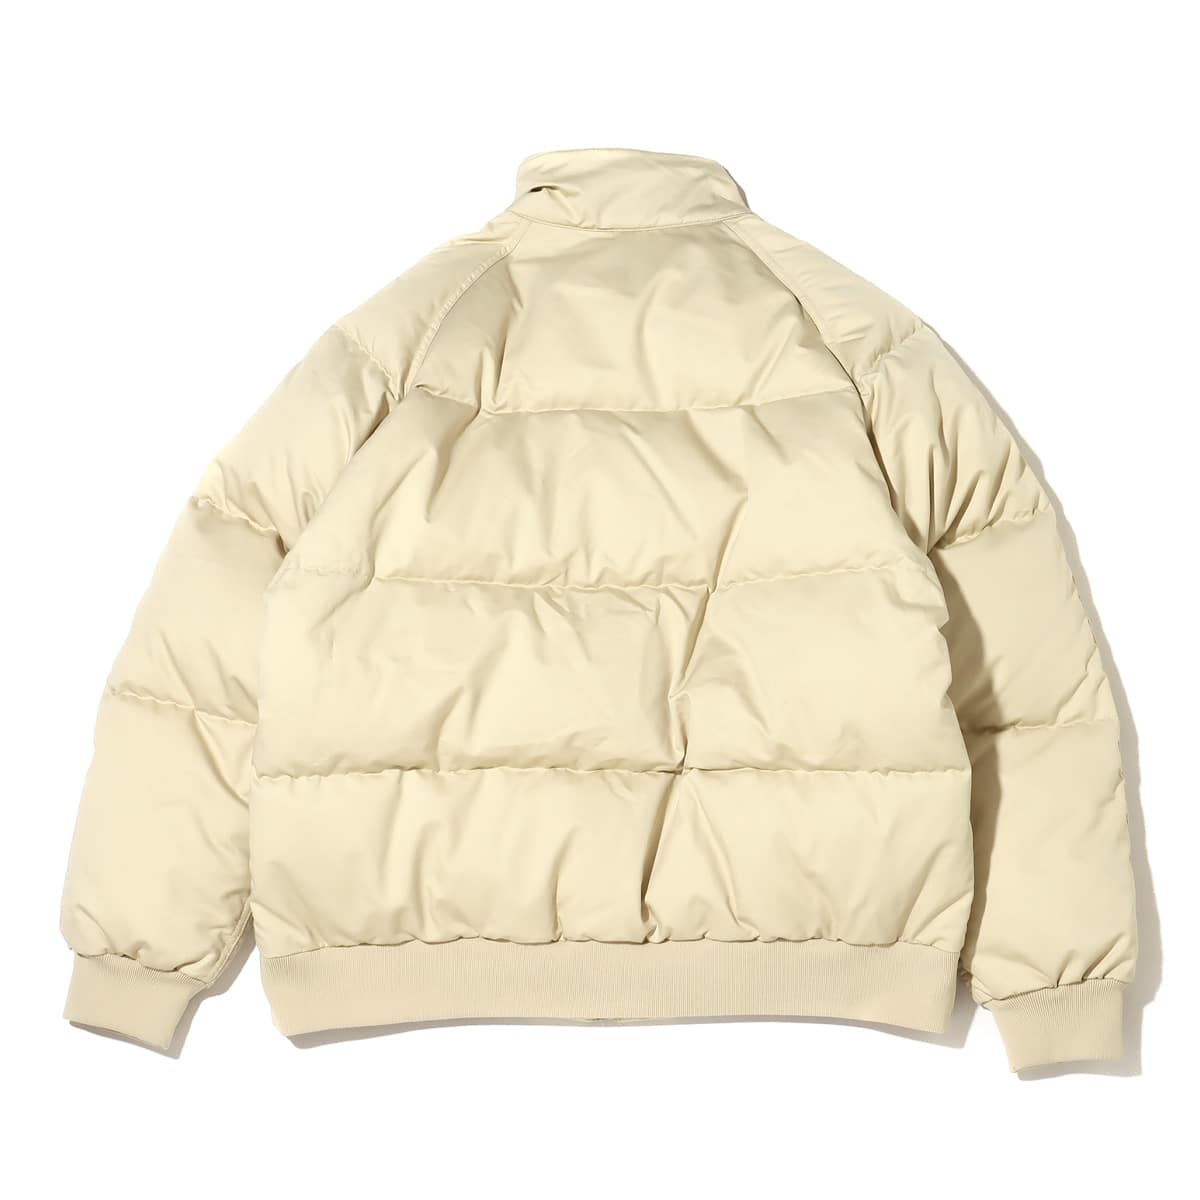 THE NORTH FACE PURPLE LABEL Lightweight Twill Mountain Down Jacket